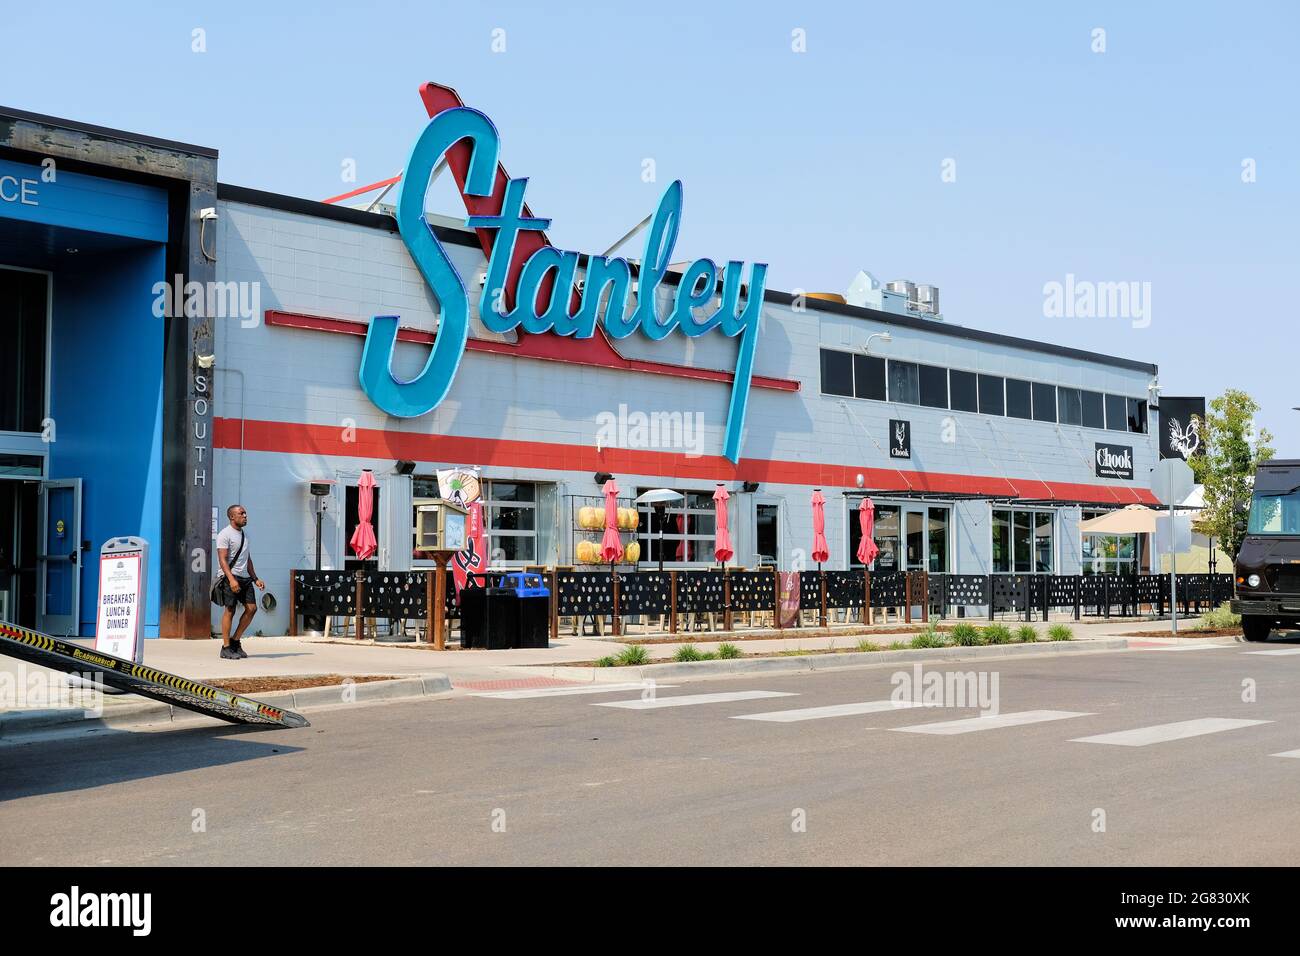 https://c8.alamy.com/comp/2G830XK/stanley-marketplace-in-aurora-colorado-former-home-of-stanley-aviation-converted-into-a-dining-retail-entertainment-event-facility-near-denver-2G830XK.jpg